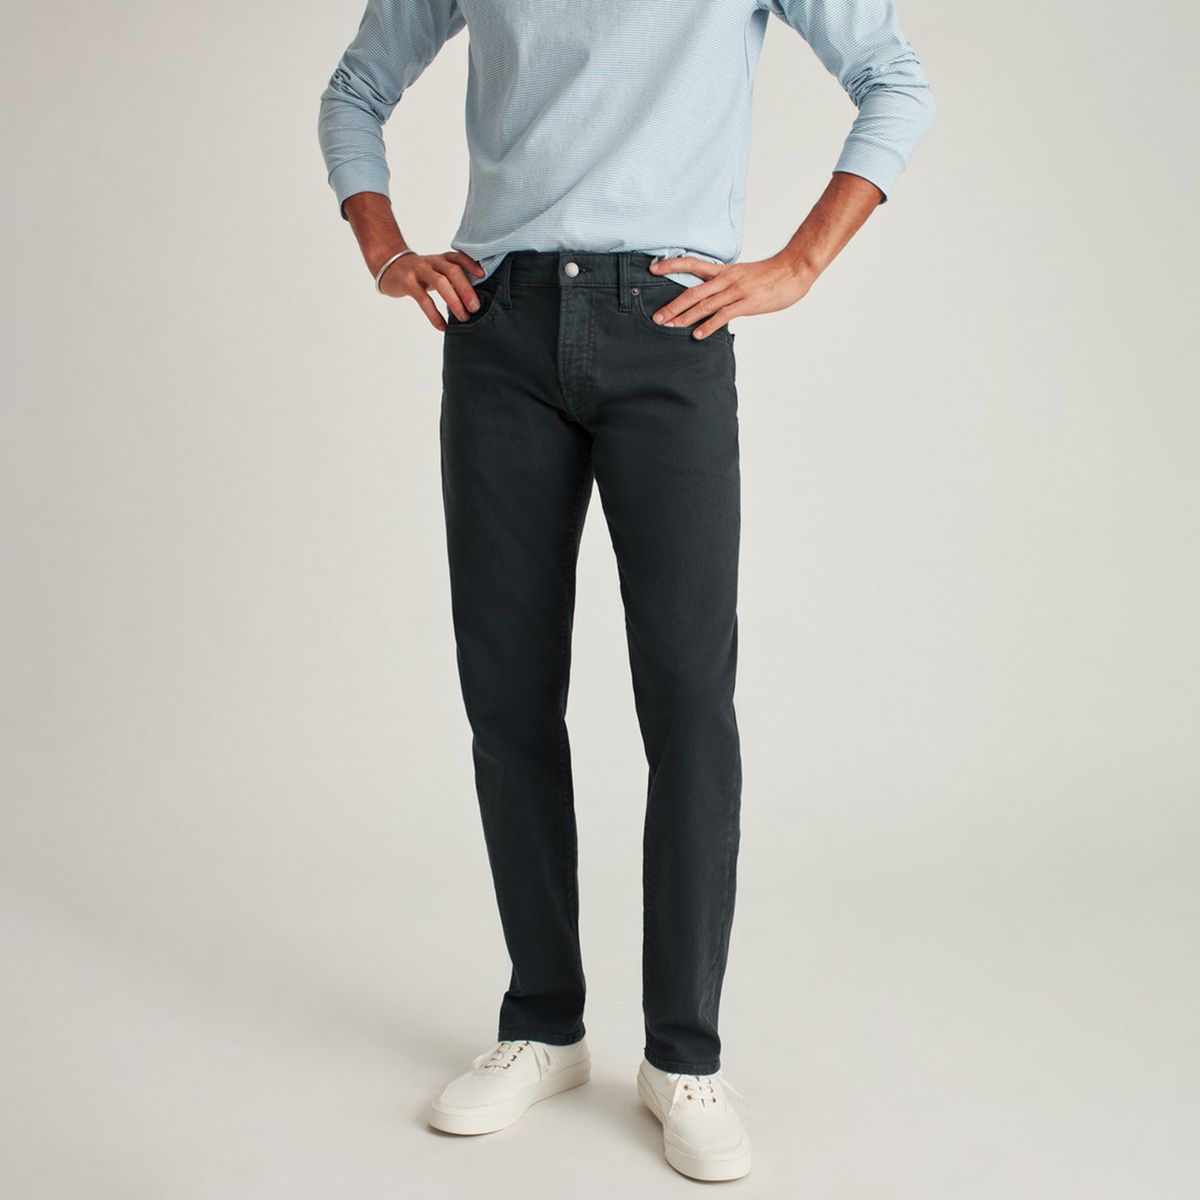 Best Jeans: Bonobos Extra Stretch Travel Jeans